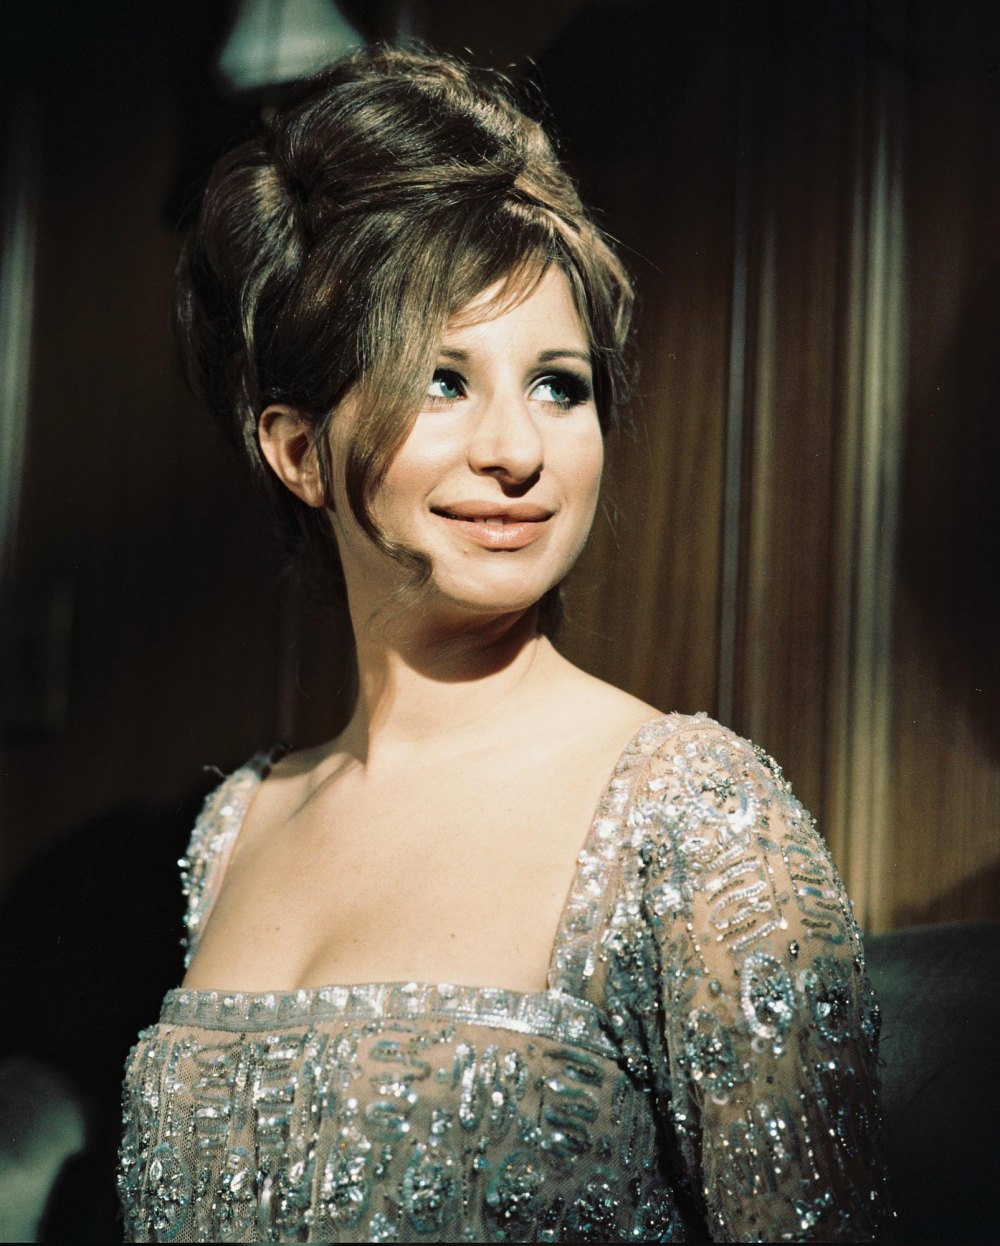 Barbra Streisand Details Ups and Downs With Ex Elliot Gould's Mom and More Book Revelations 238